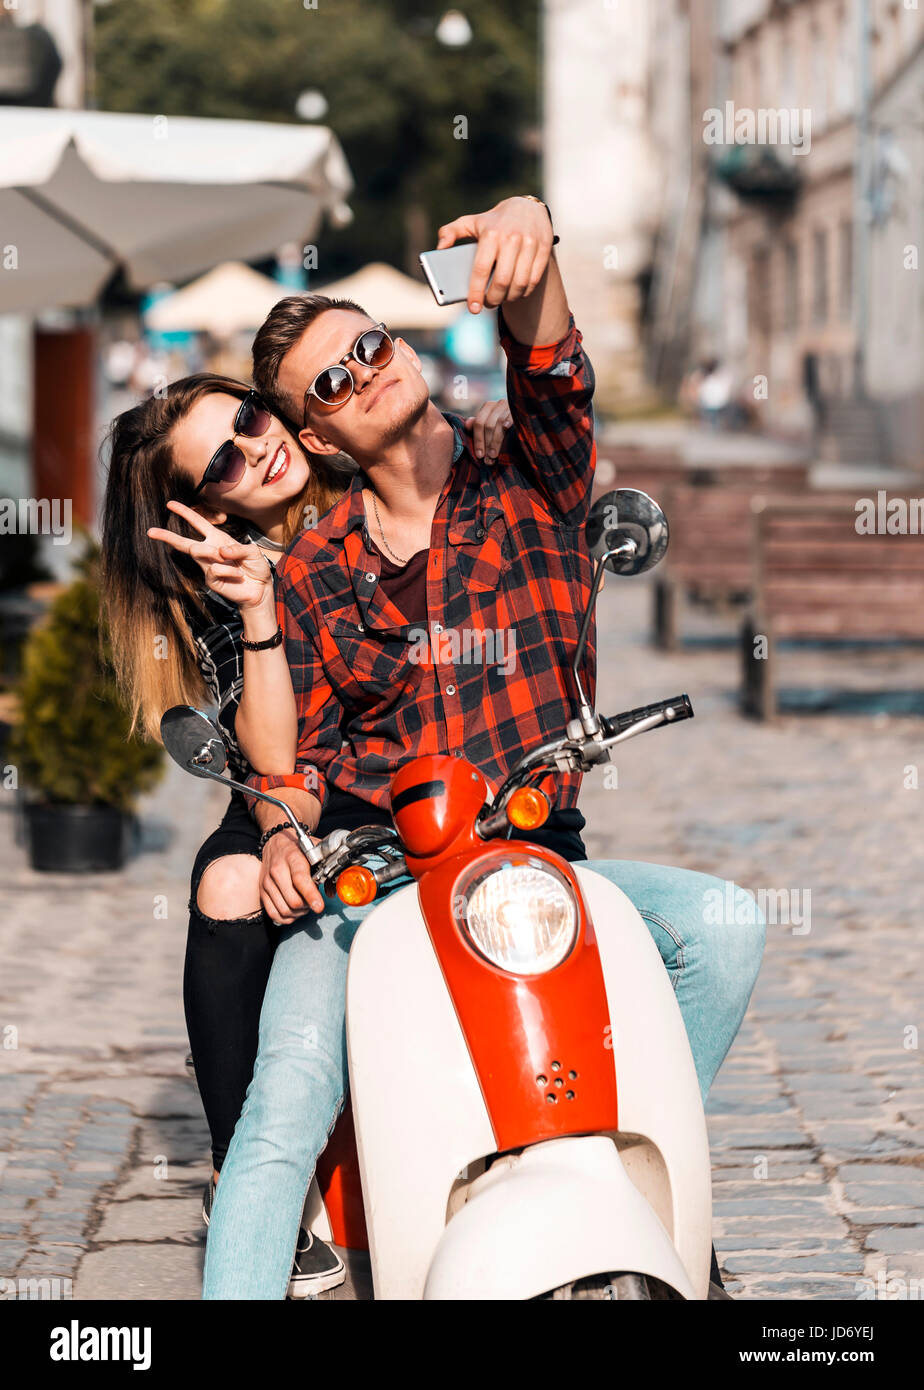 Young attractive couple of teenagers wears sunglasses on retro motorbike makes selfie, sunny street, urban hipster concept Stock Photo